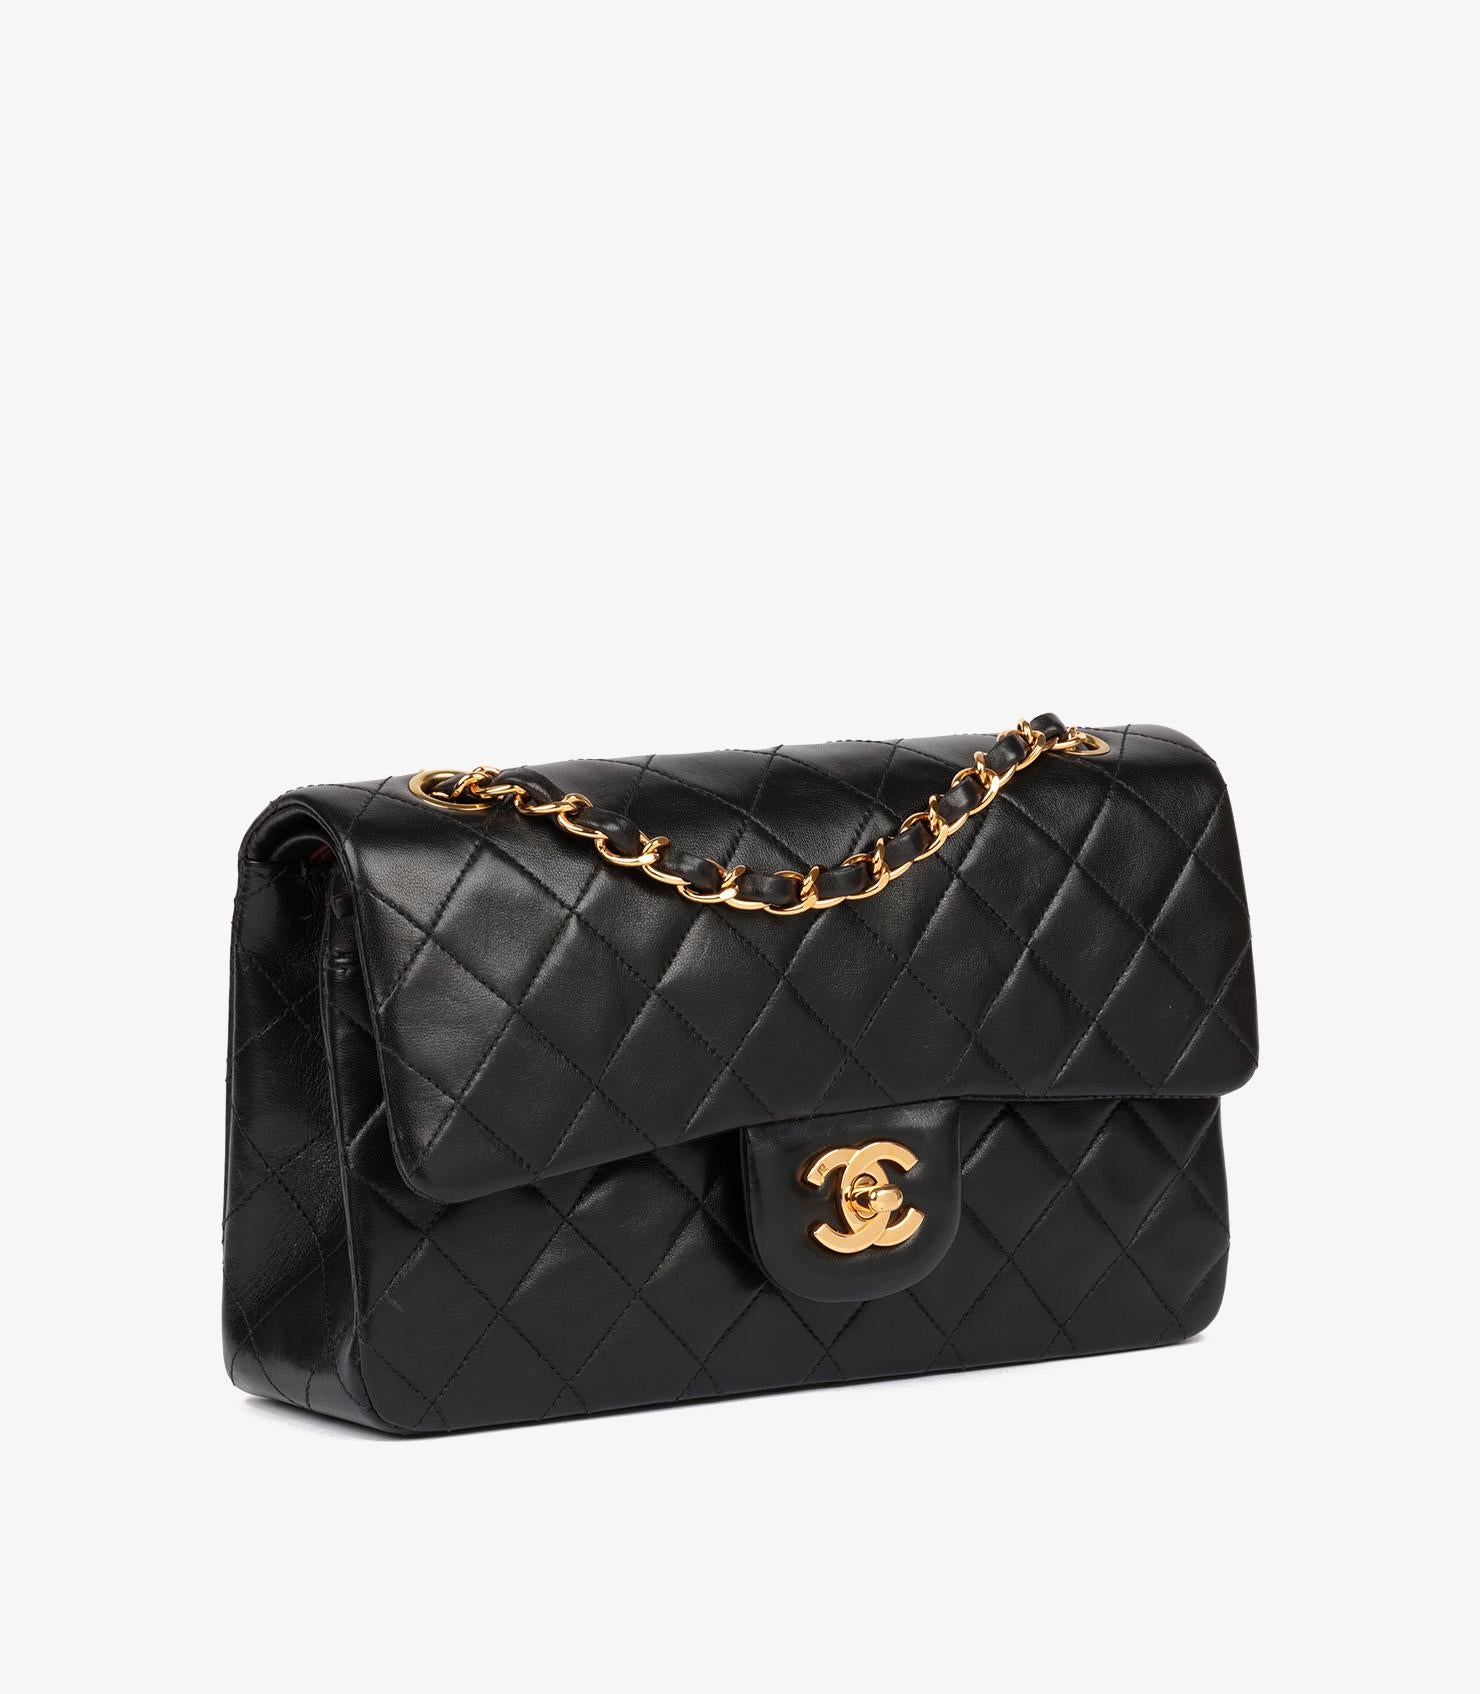 Chanel Black Quilted Lambskin Vintage Small Classic Double Flap Bag

Brand- Chanel
Model- Small Classic Double Flap Bag
Product Type- Shoulder
Serial Number- 50*****
Age- Circa 1998
Accompanied By- Chanel Dust Bag, Authenticity Card
Colour-